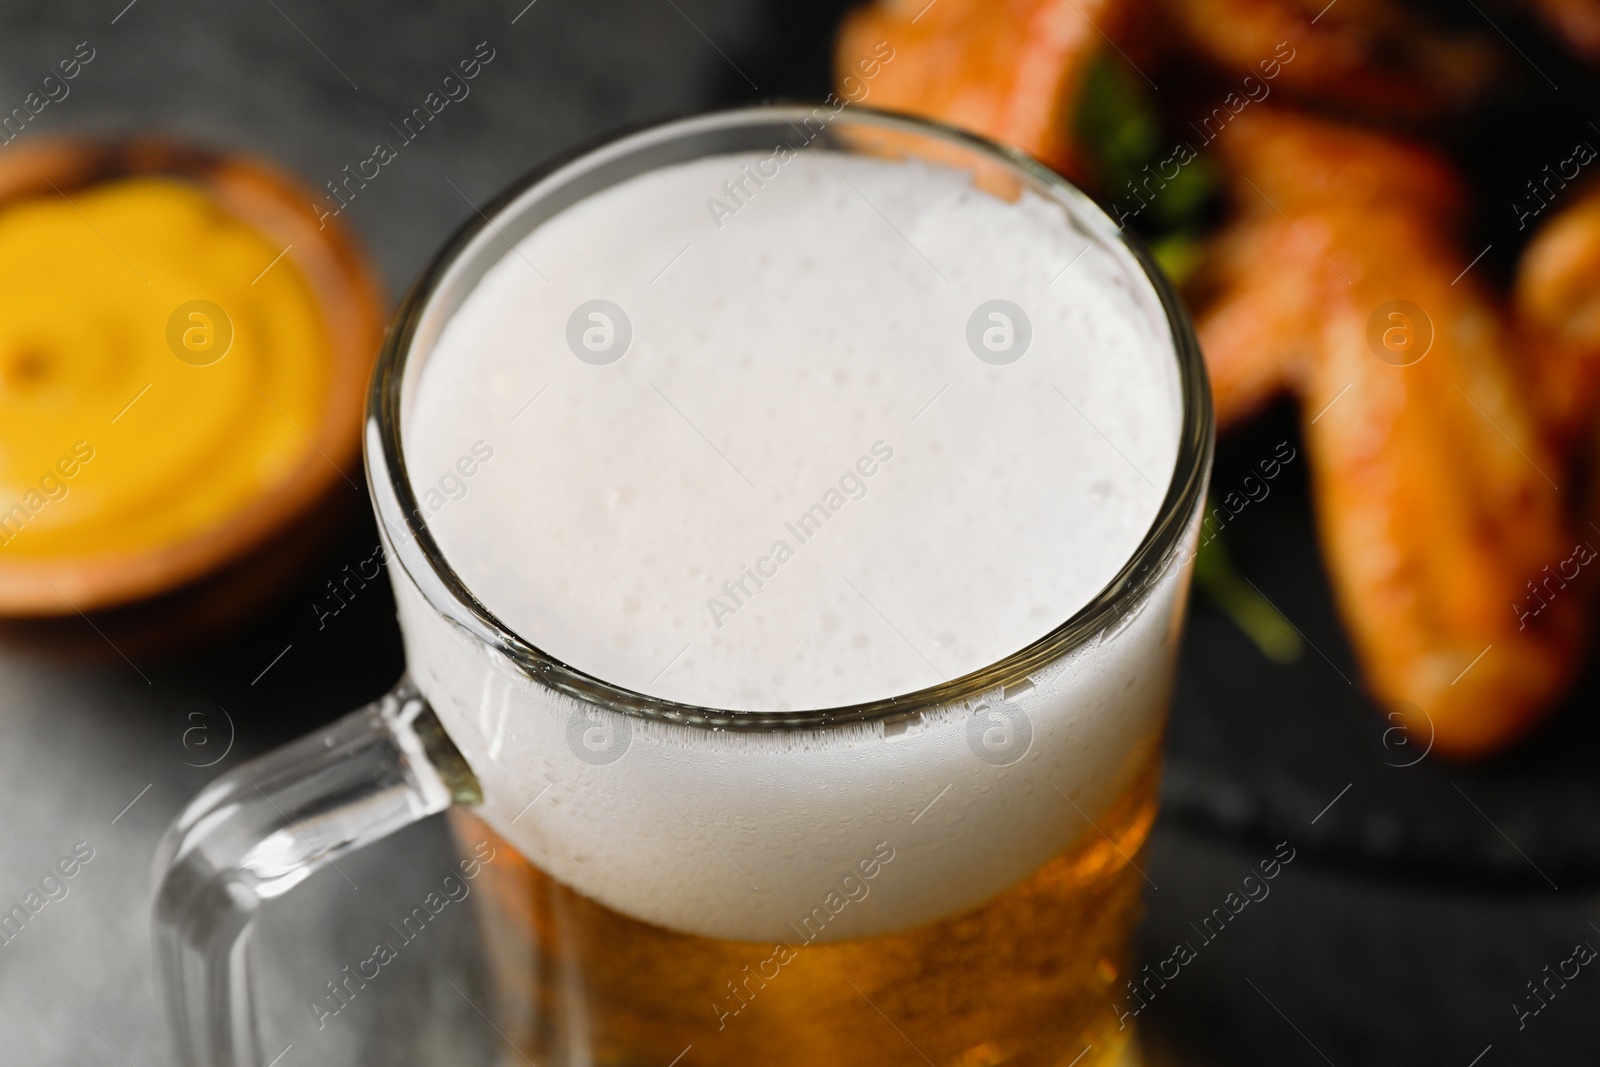 Photo of Mug with delicious beer and baked chicken wings on table, closeup